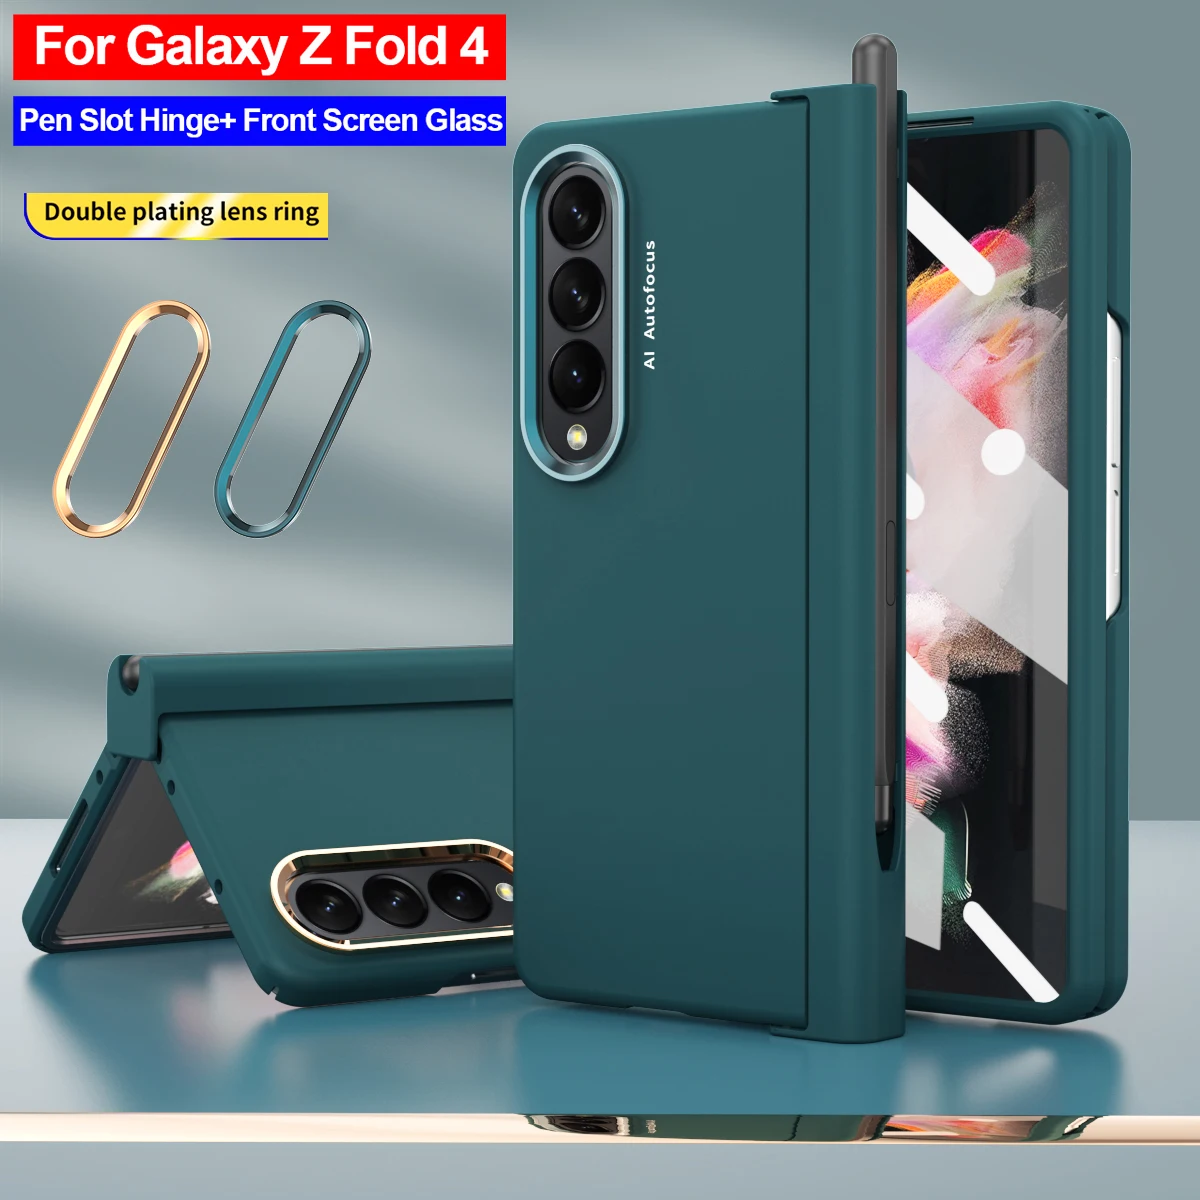 

With Touch Pen Slot Capa for Samsung Galaxy Z Fold 4 5G Case 2 Pcs Lens Ring Front Screen Glass Protect Cover for Galaxy Z Fold4